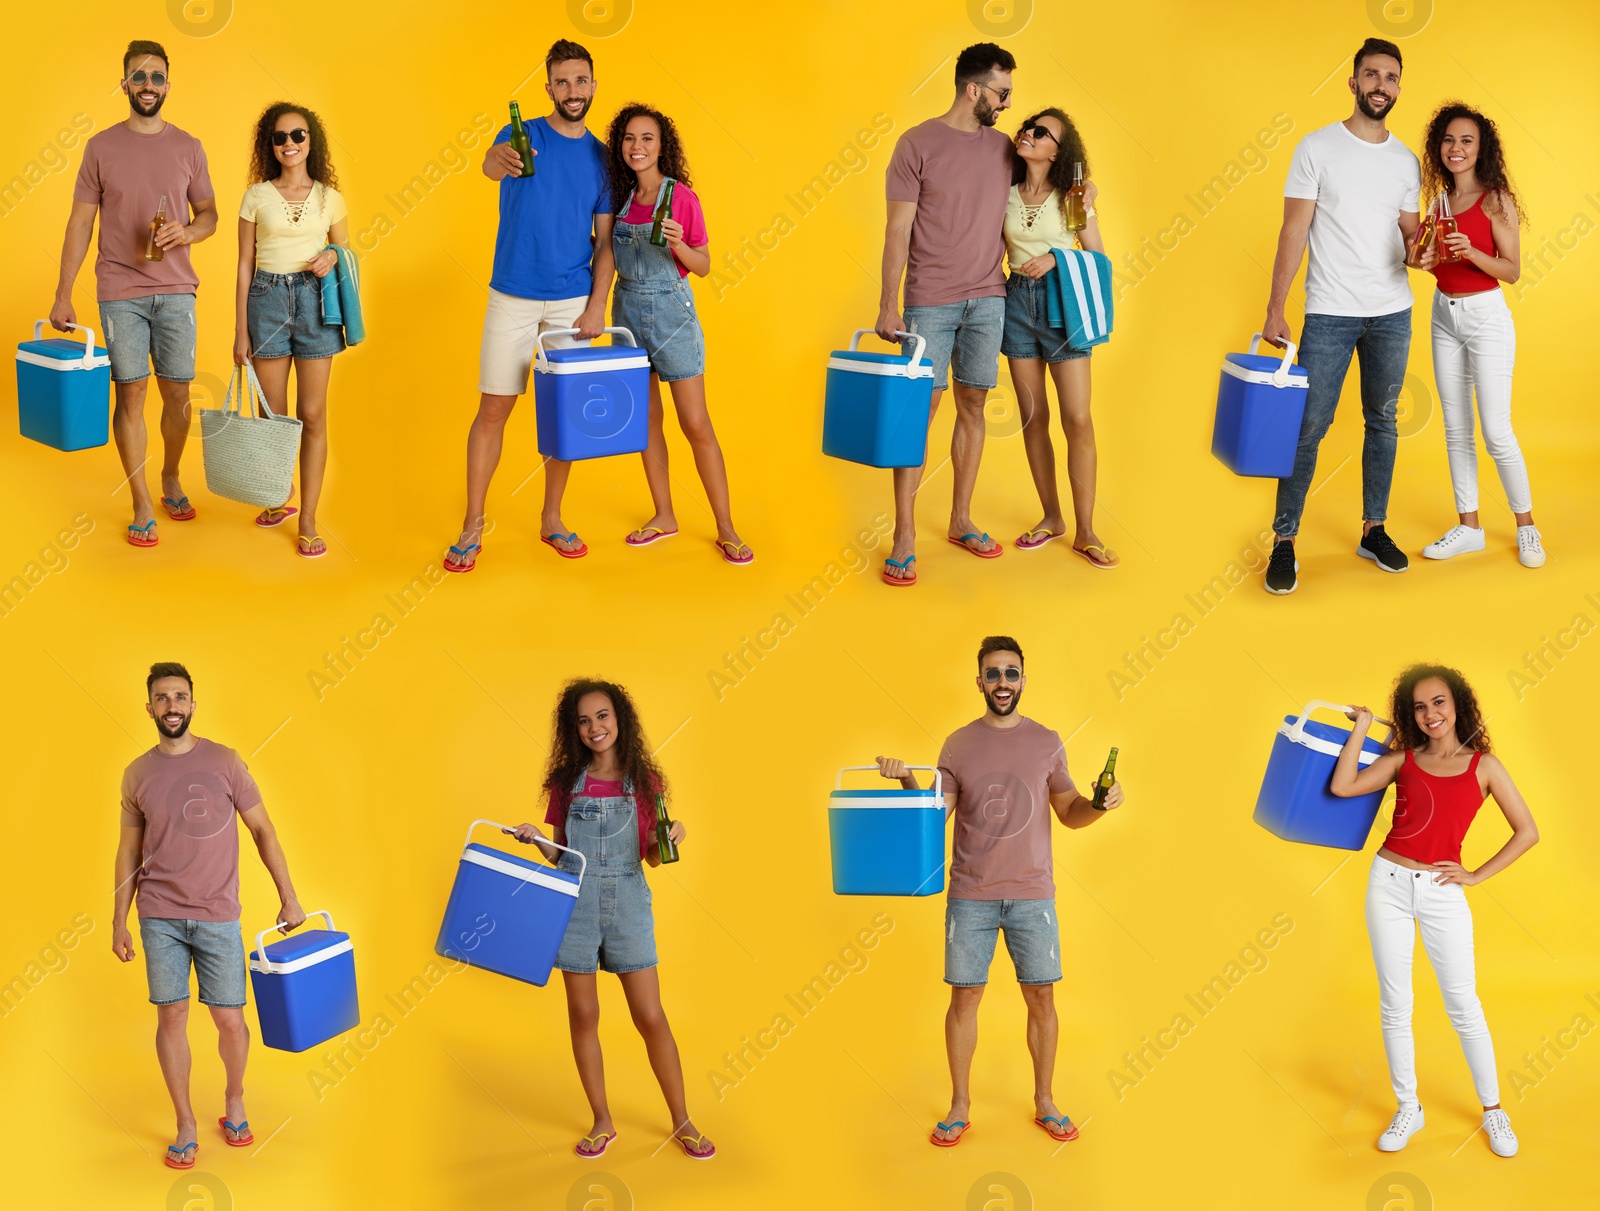 Image of Collage with photos of people holding cool boxes on yellow background